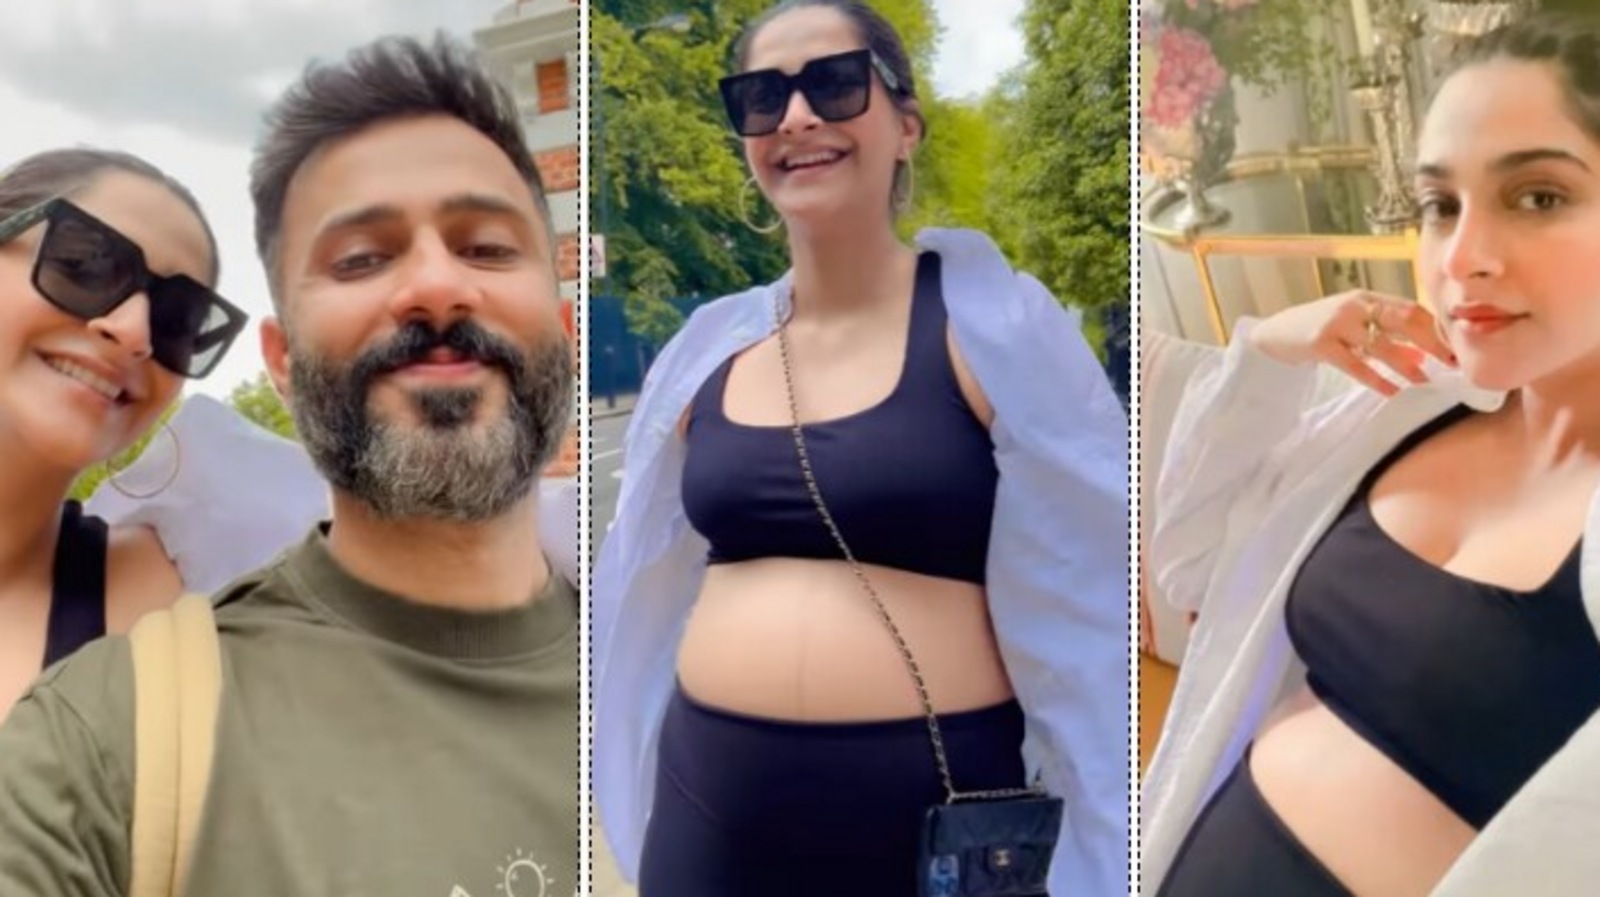 Carina Kpor Sxs Video - Sonam Kapoor shows baby bump in new video with husband Anand Ahuja |  Bollywood - Hindustan Times